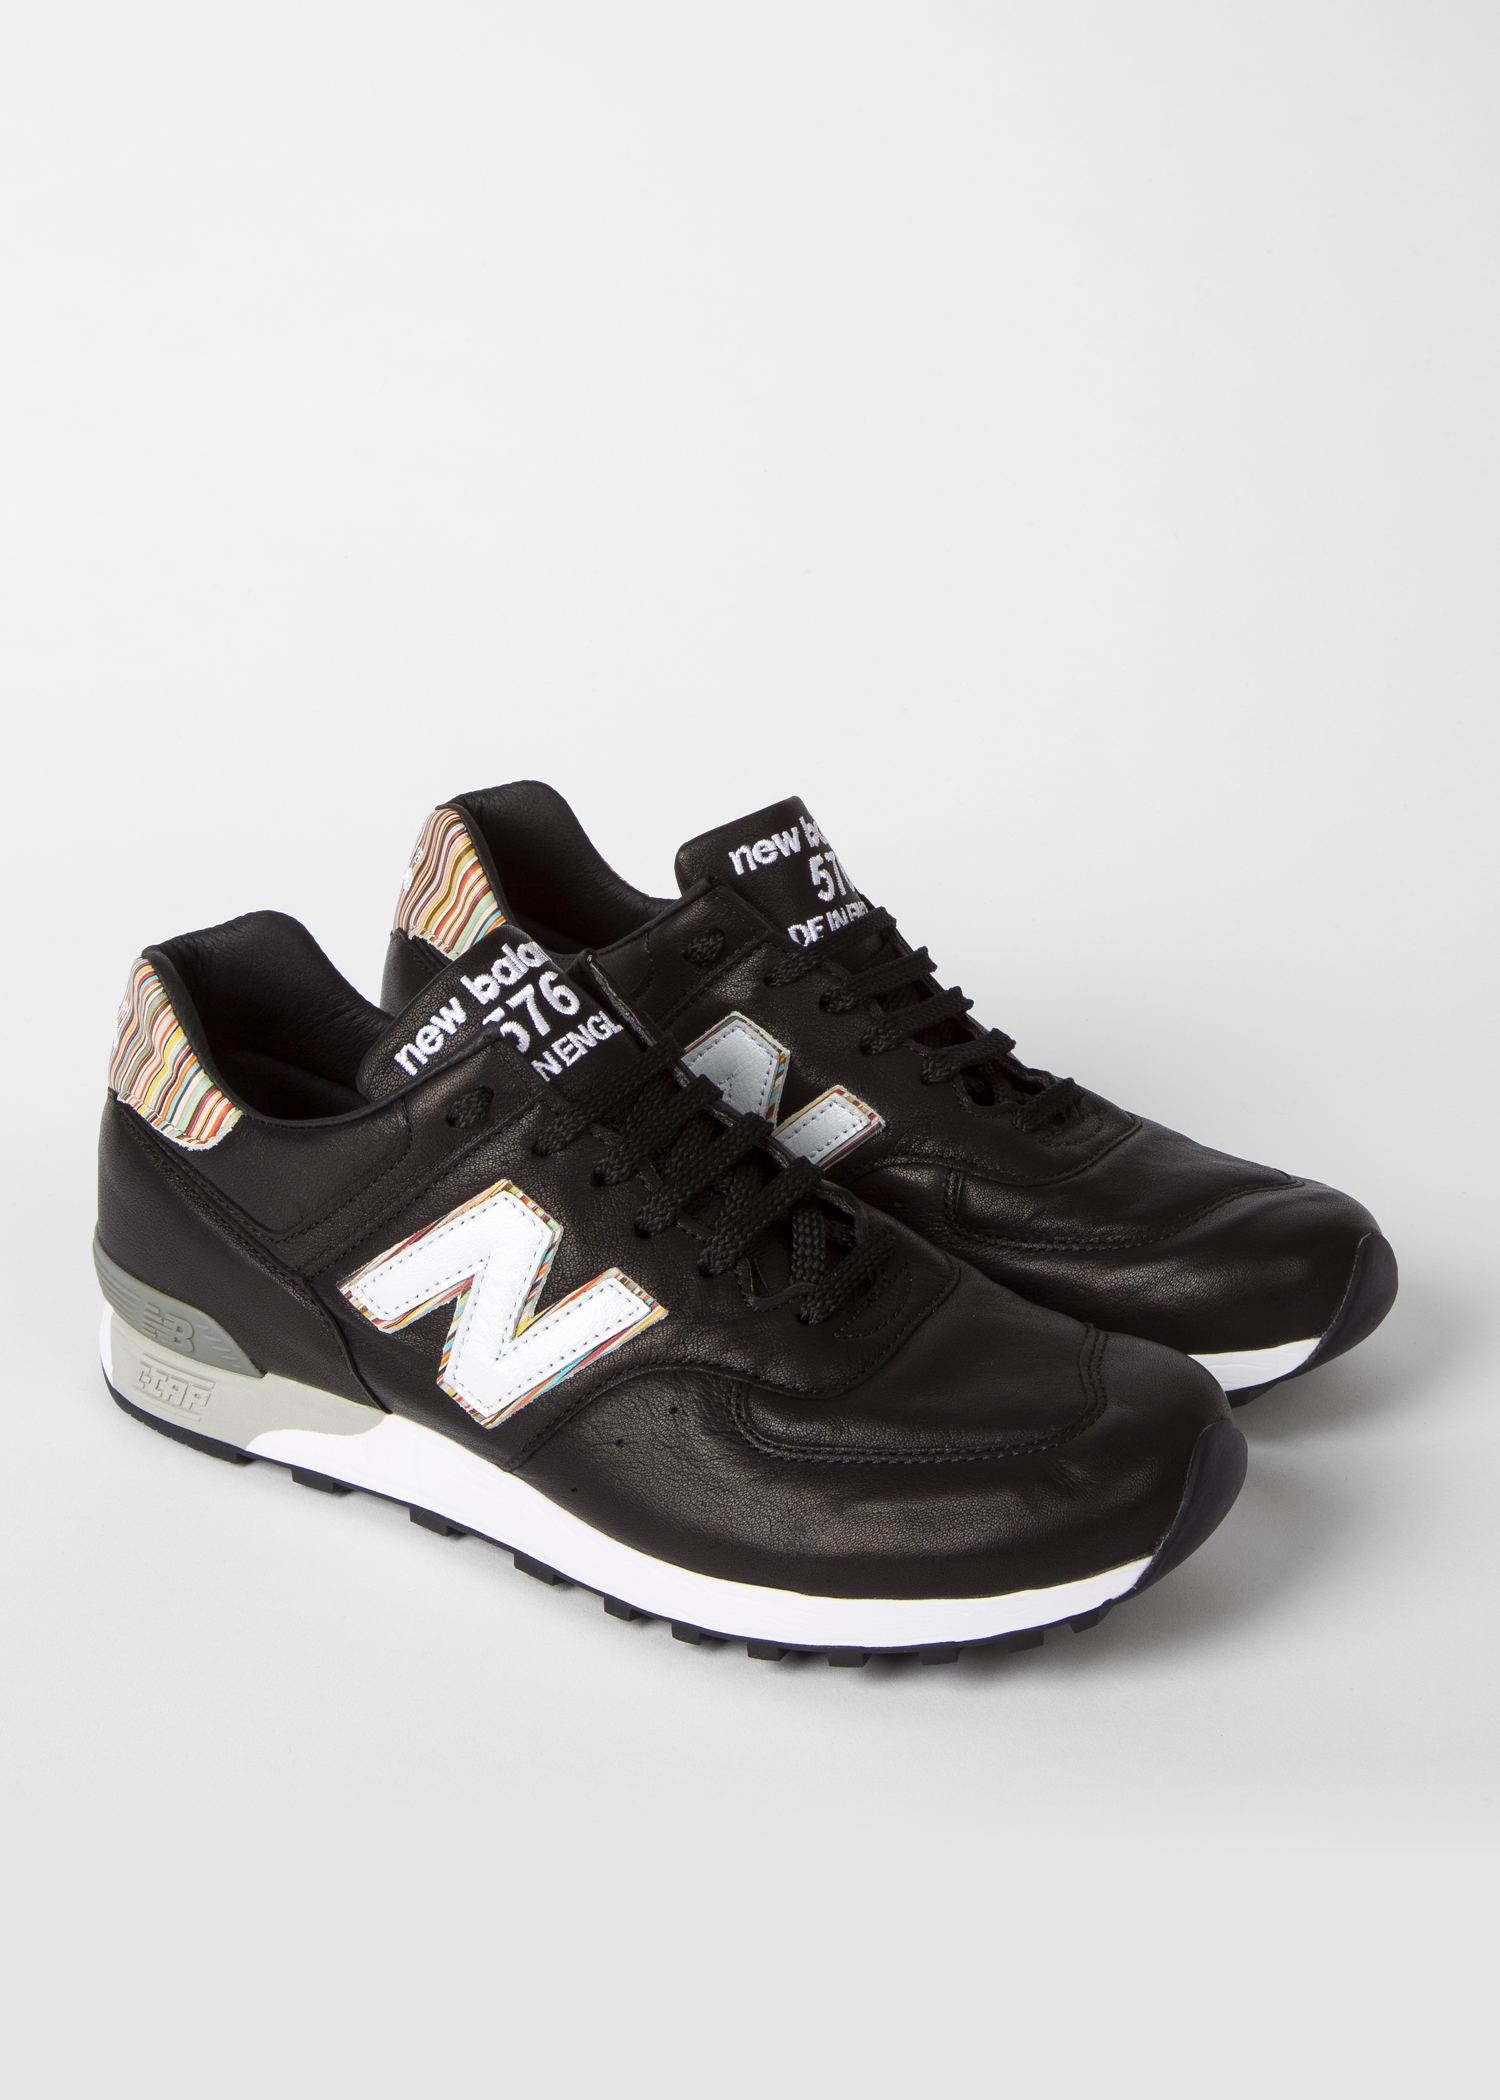 New Balance + Paul Smith - Men's Black Leather 576 Trainers - Paul Smith